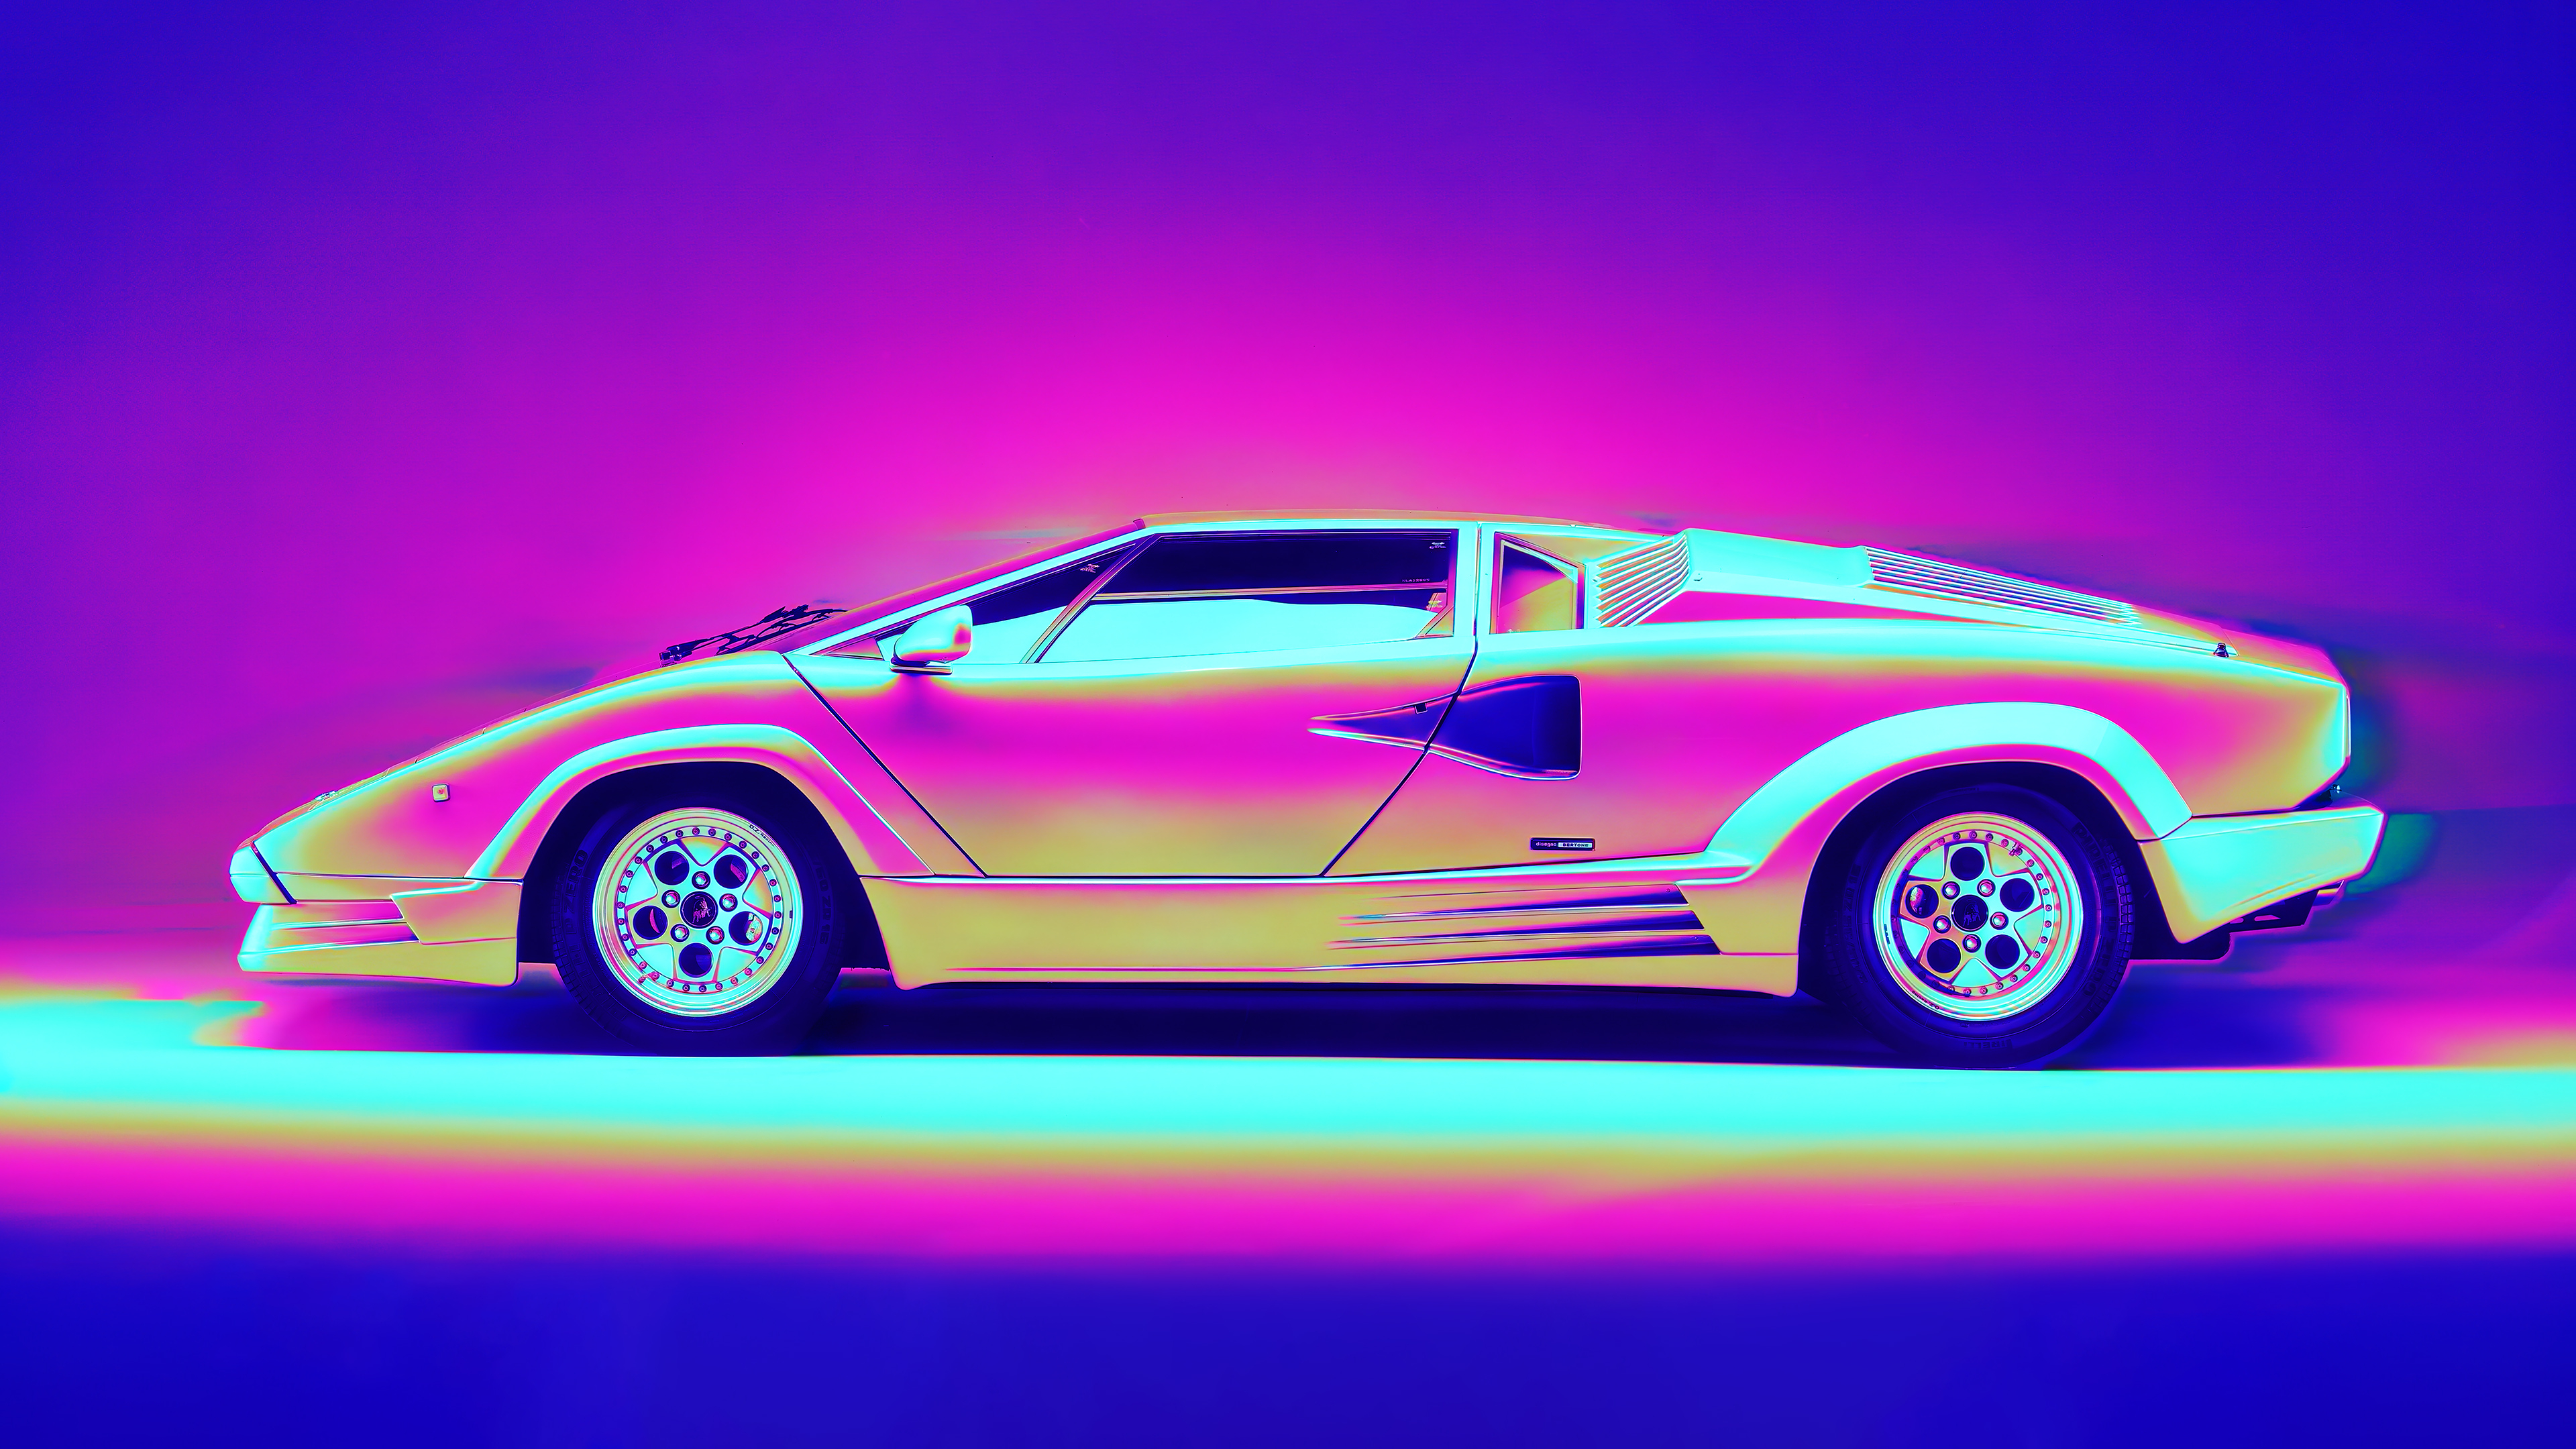 3840x2160 2048x2048 Lamborghini Countach Retro Artwork 4k Ipad Air HD 4k Wallpapers, Images, Backgrounds, Photos and Pictures